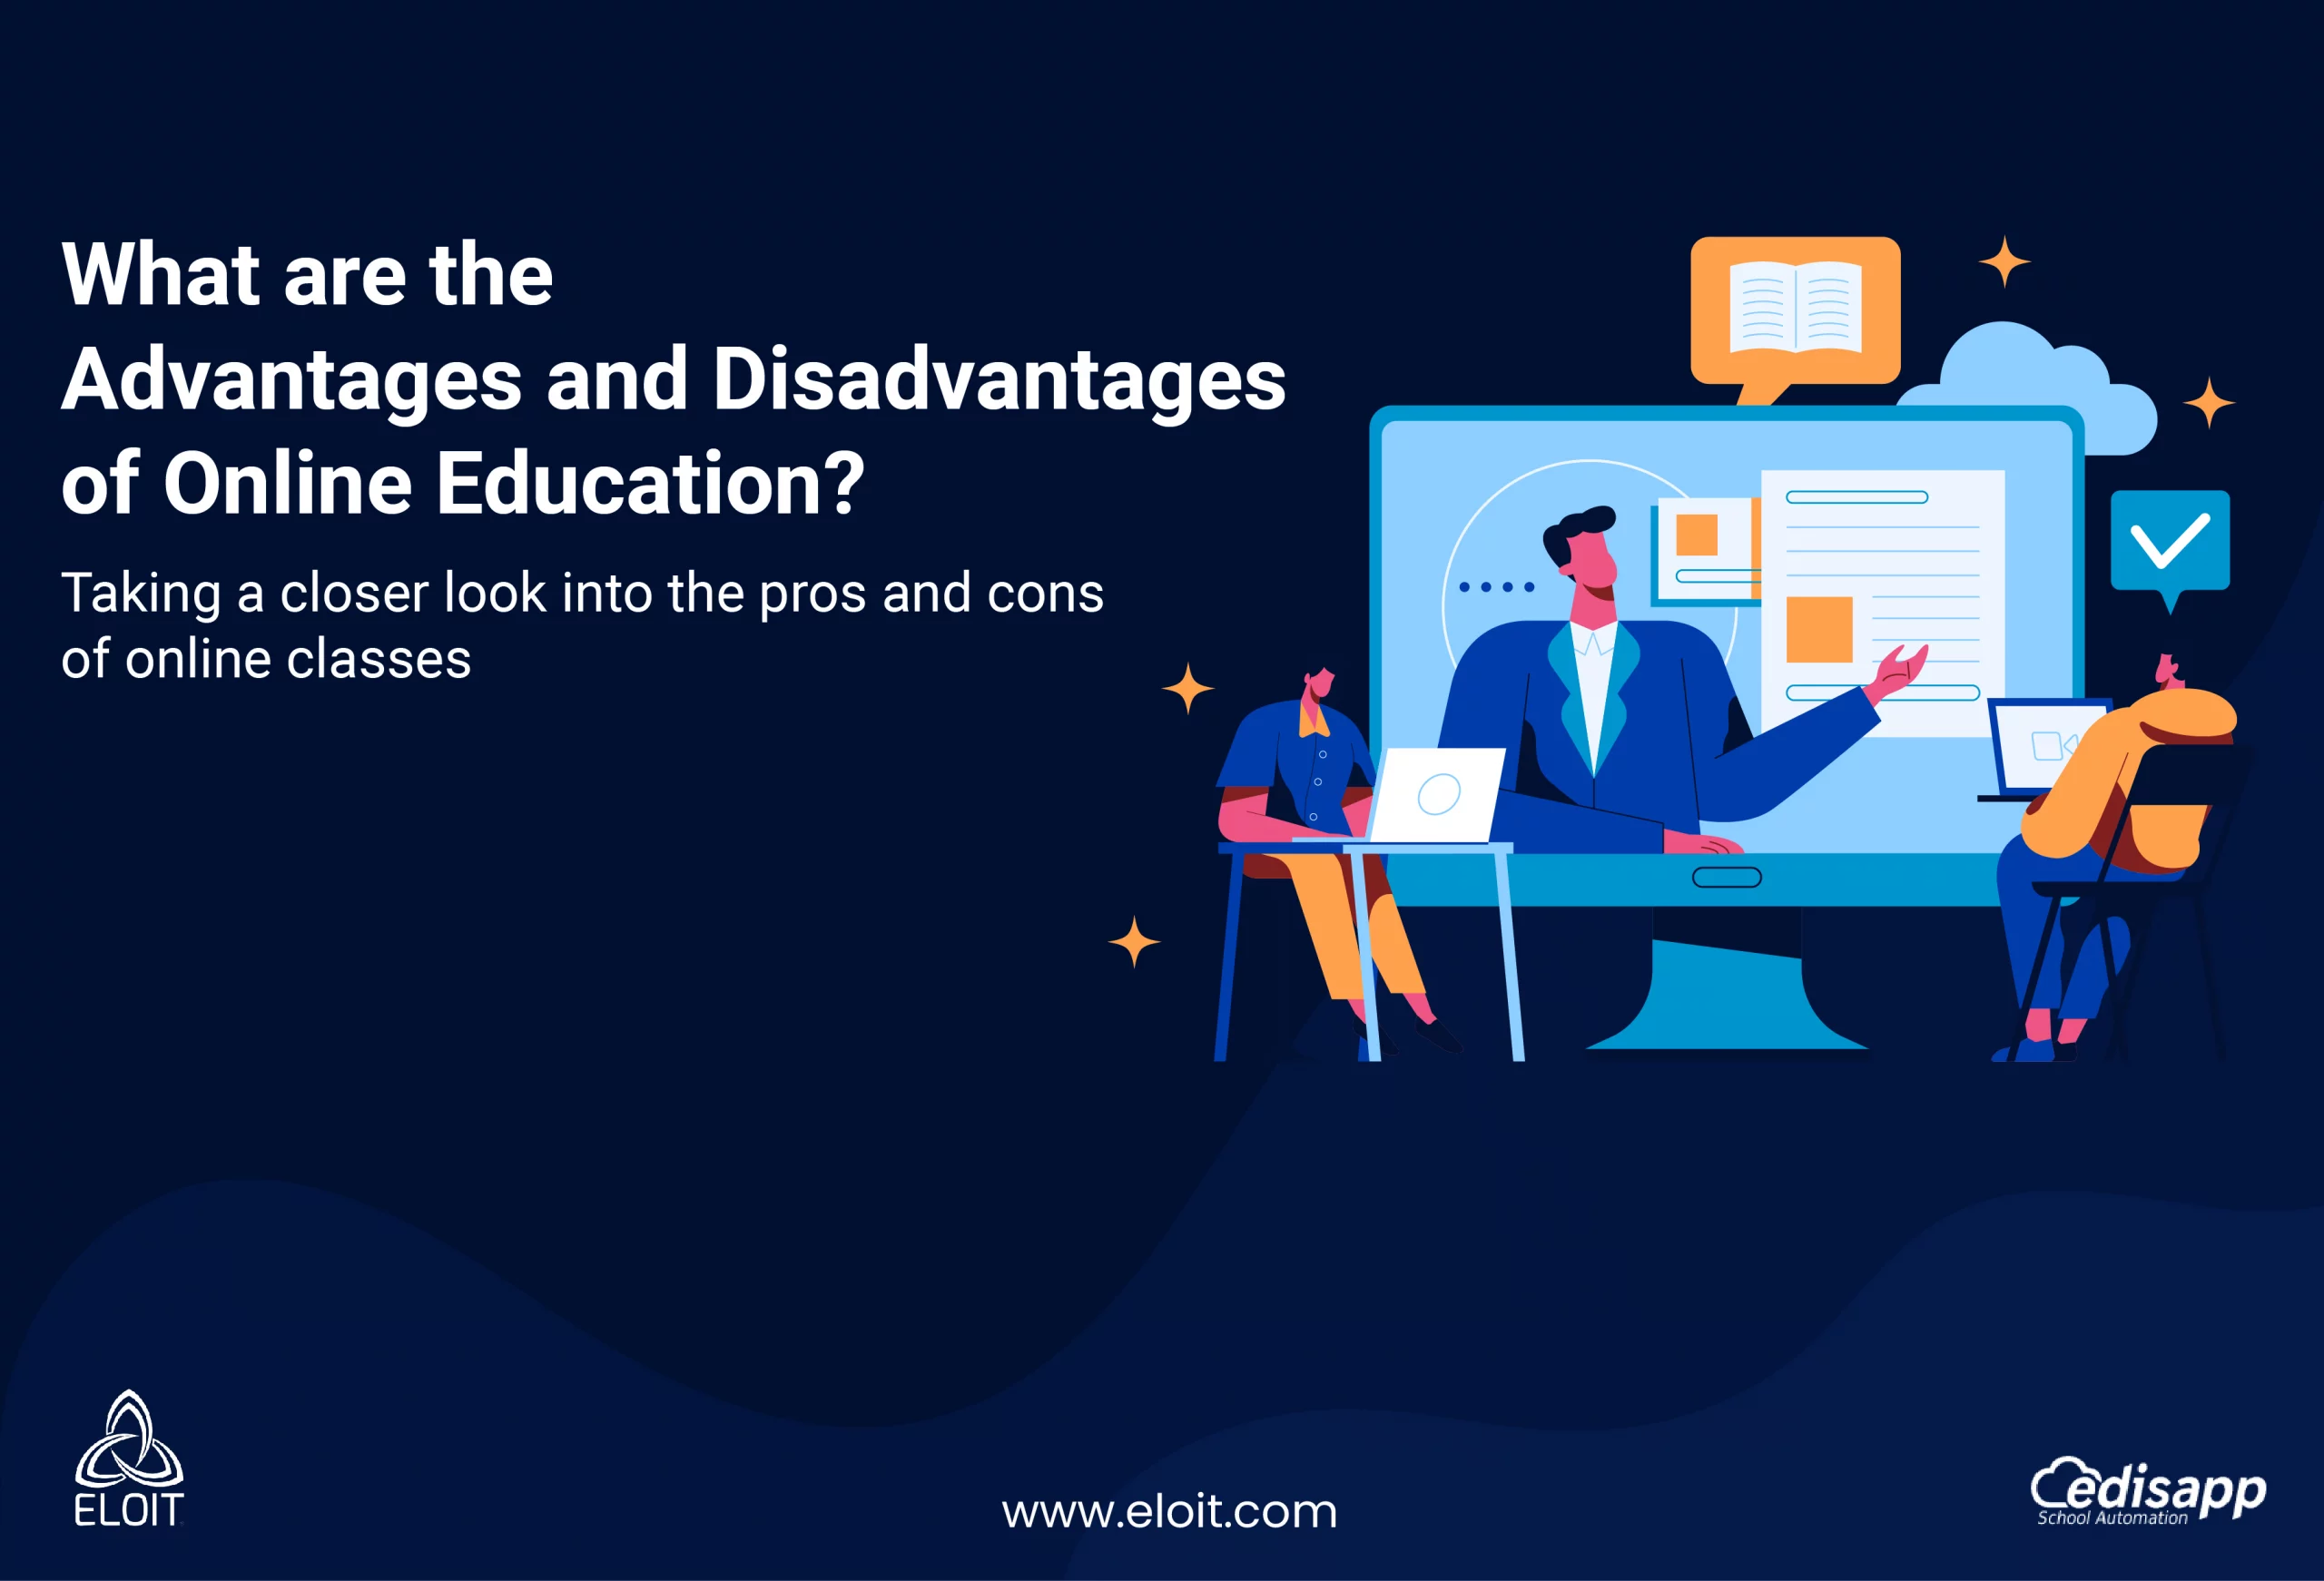 What are the Advantages and Disadvantages of Online Education?